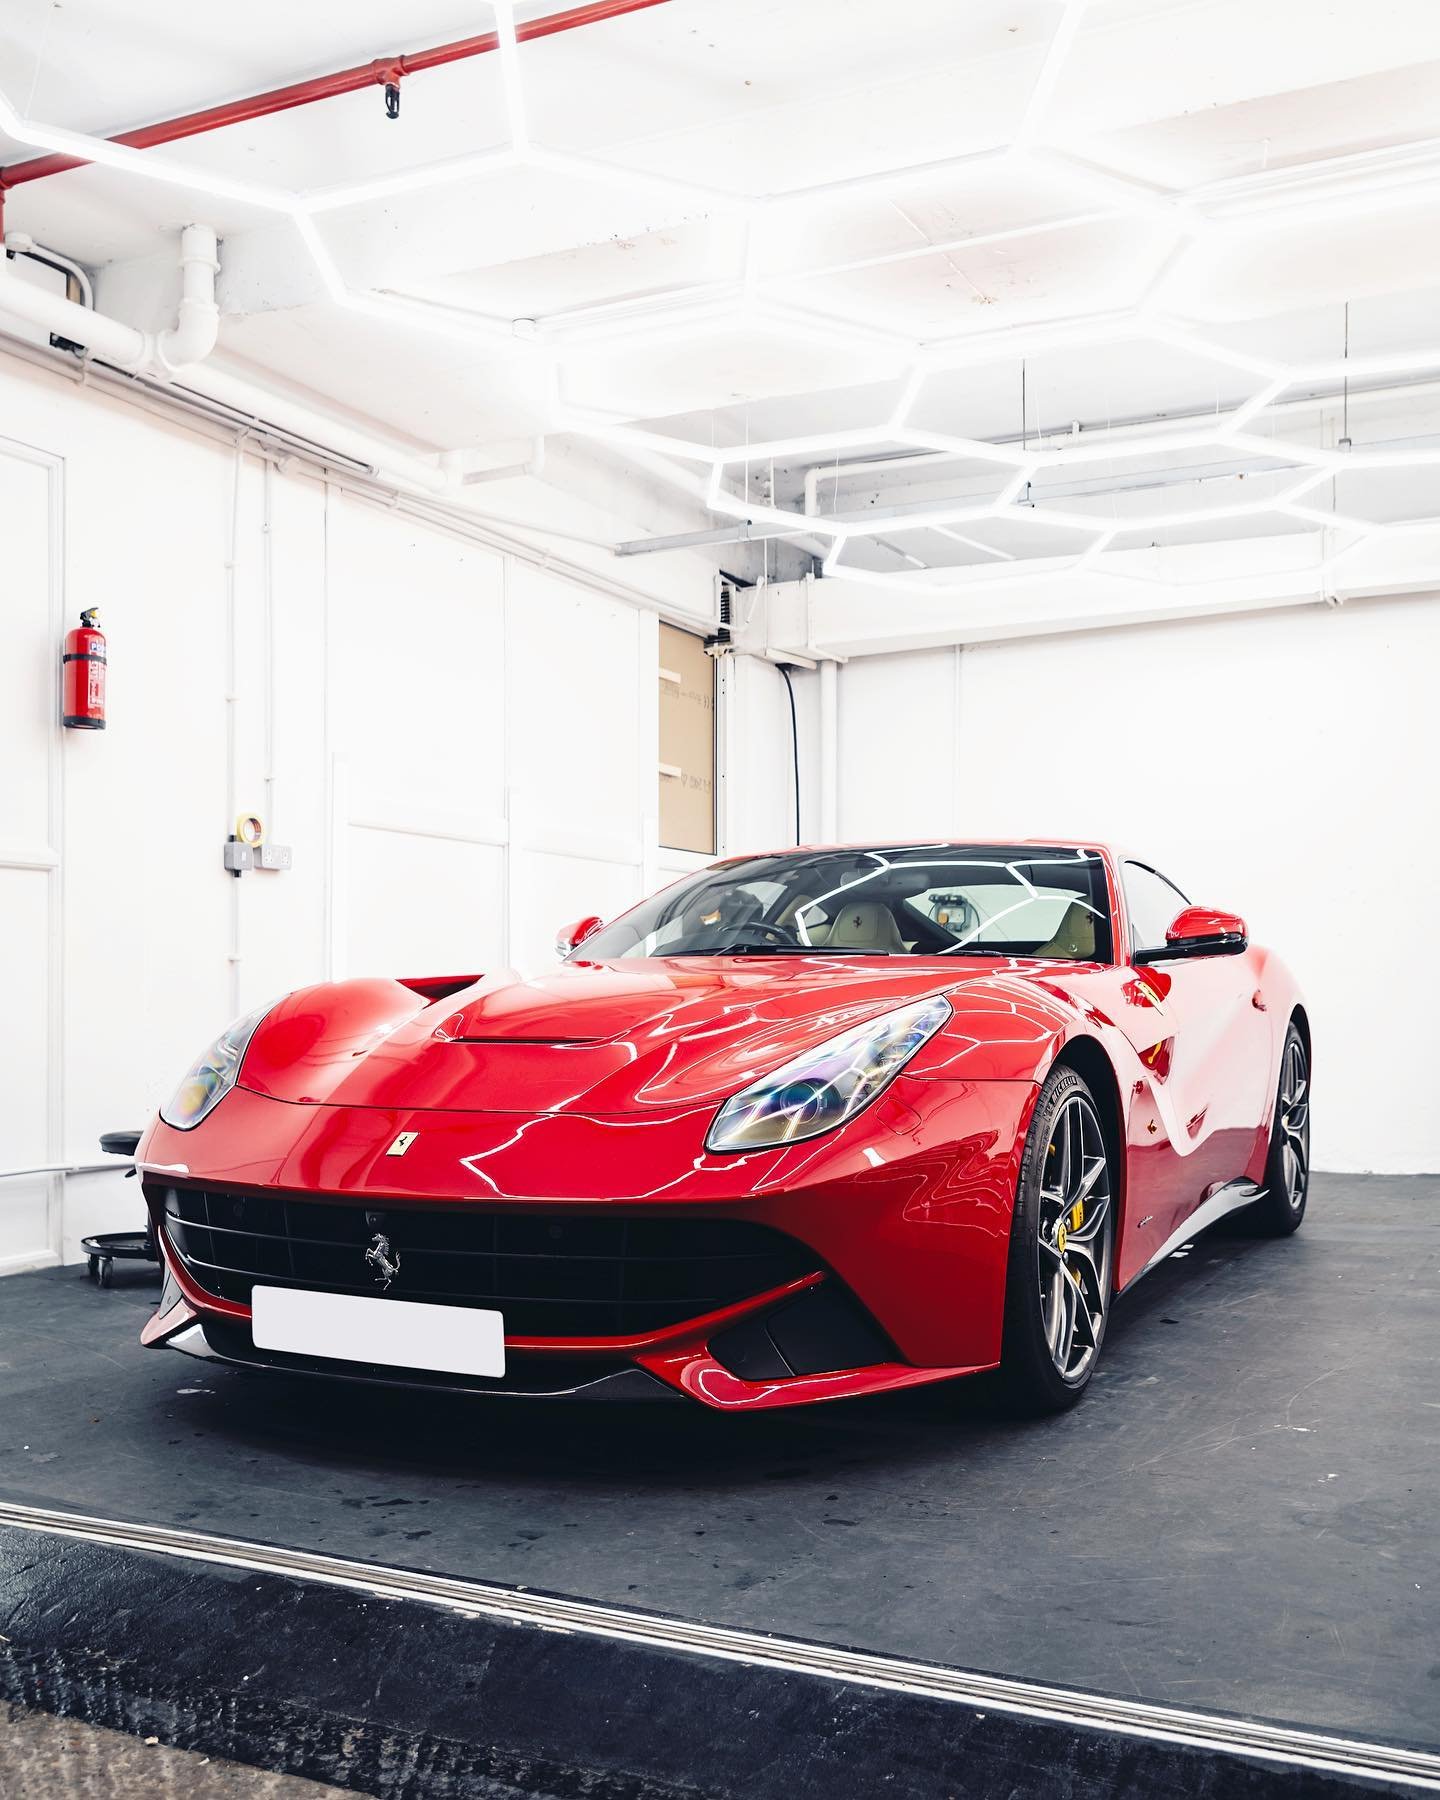 Stunning Rosso Corsa over Crema Ferrari F12 Berlinetta in with us recently for some work- one of the best front-engined GTs ever 🔥🔥 #P7AutoWorks #Ferrari #F12 #Berlinetta #F12Berlinetta #Supercars #CarWash #CarWrapping #PPF #Tints #Mayfair #London